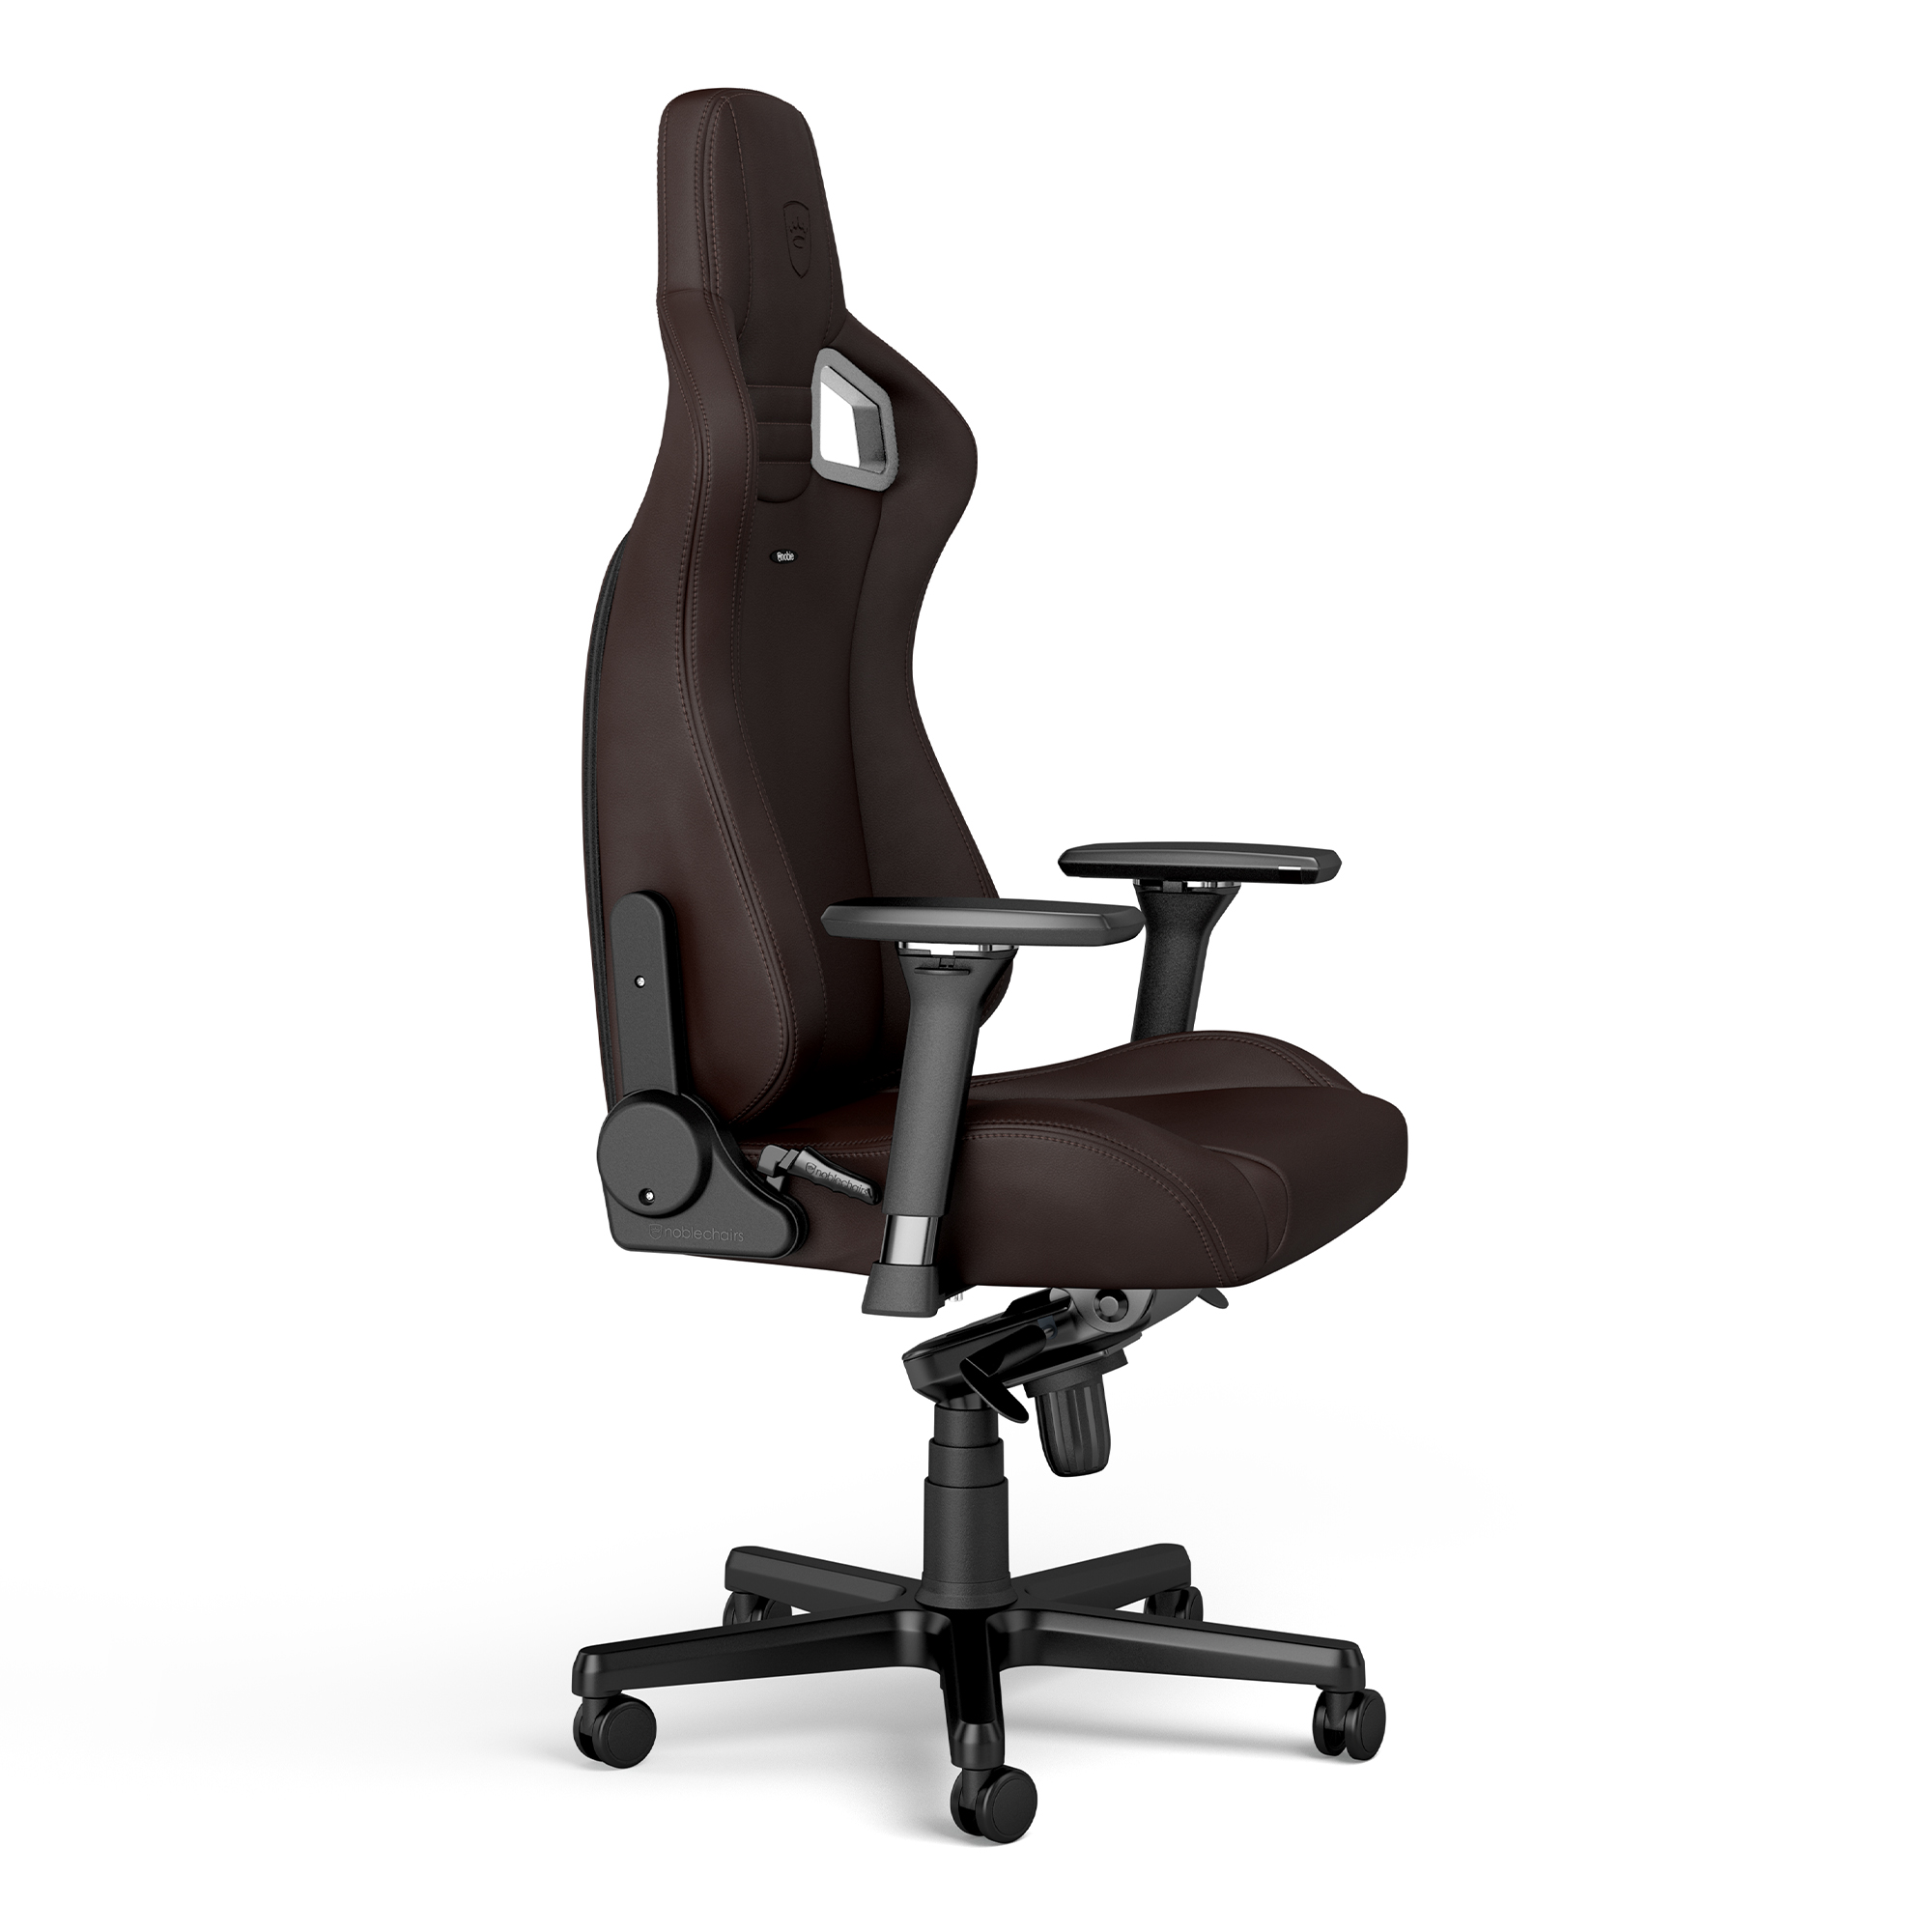 noblechairs - noblechairs EPIC Gaming Chair - Java Edition